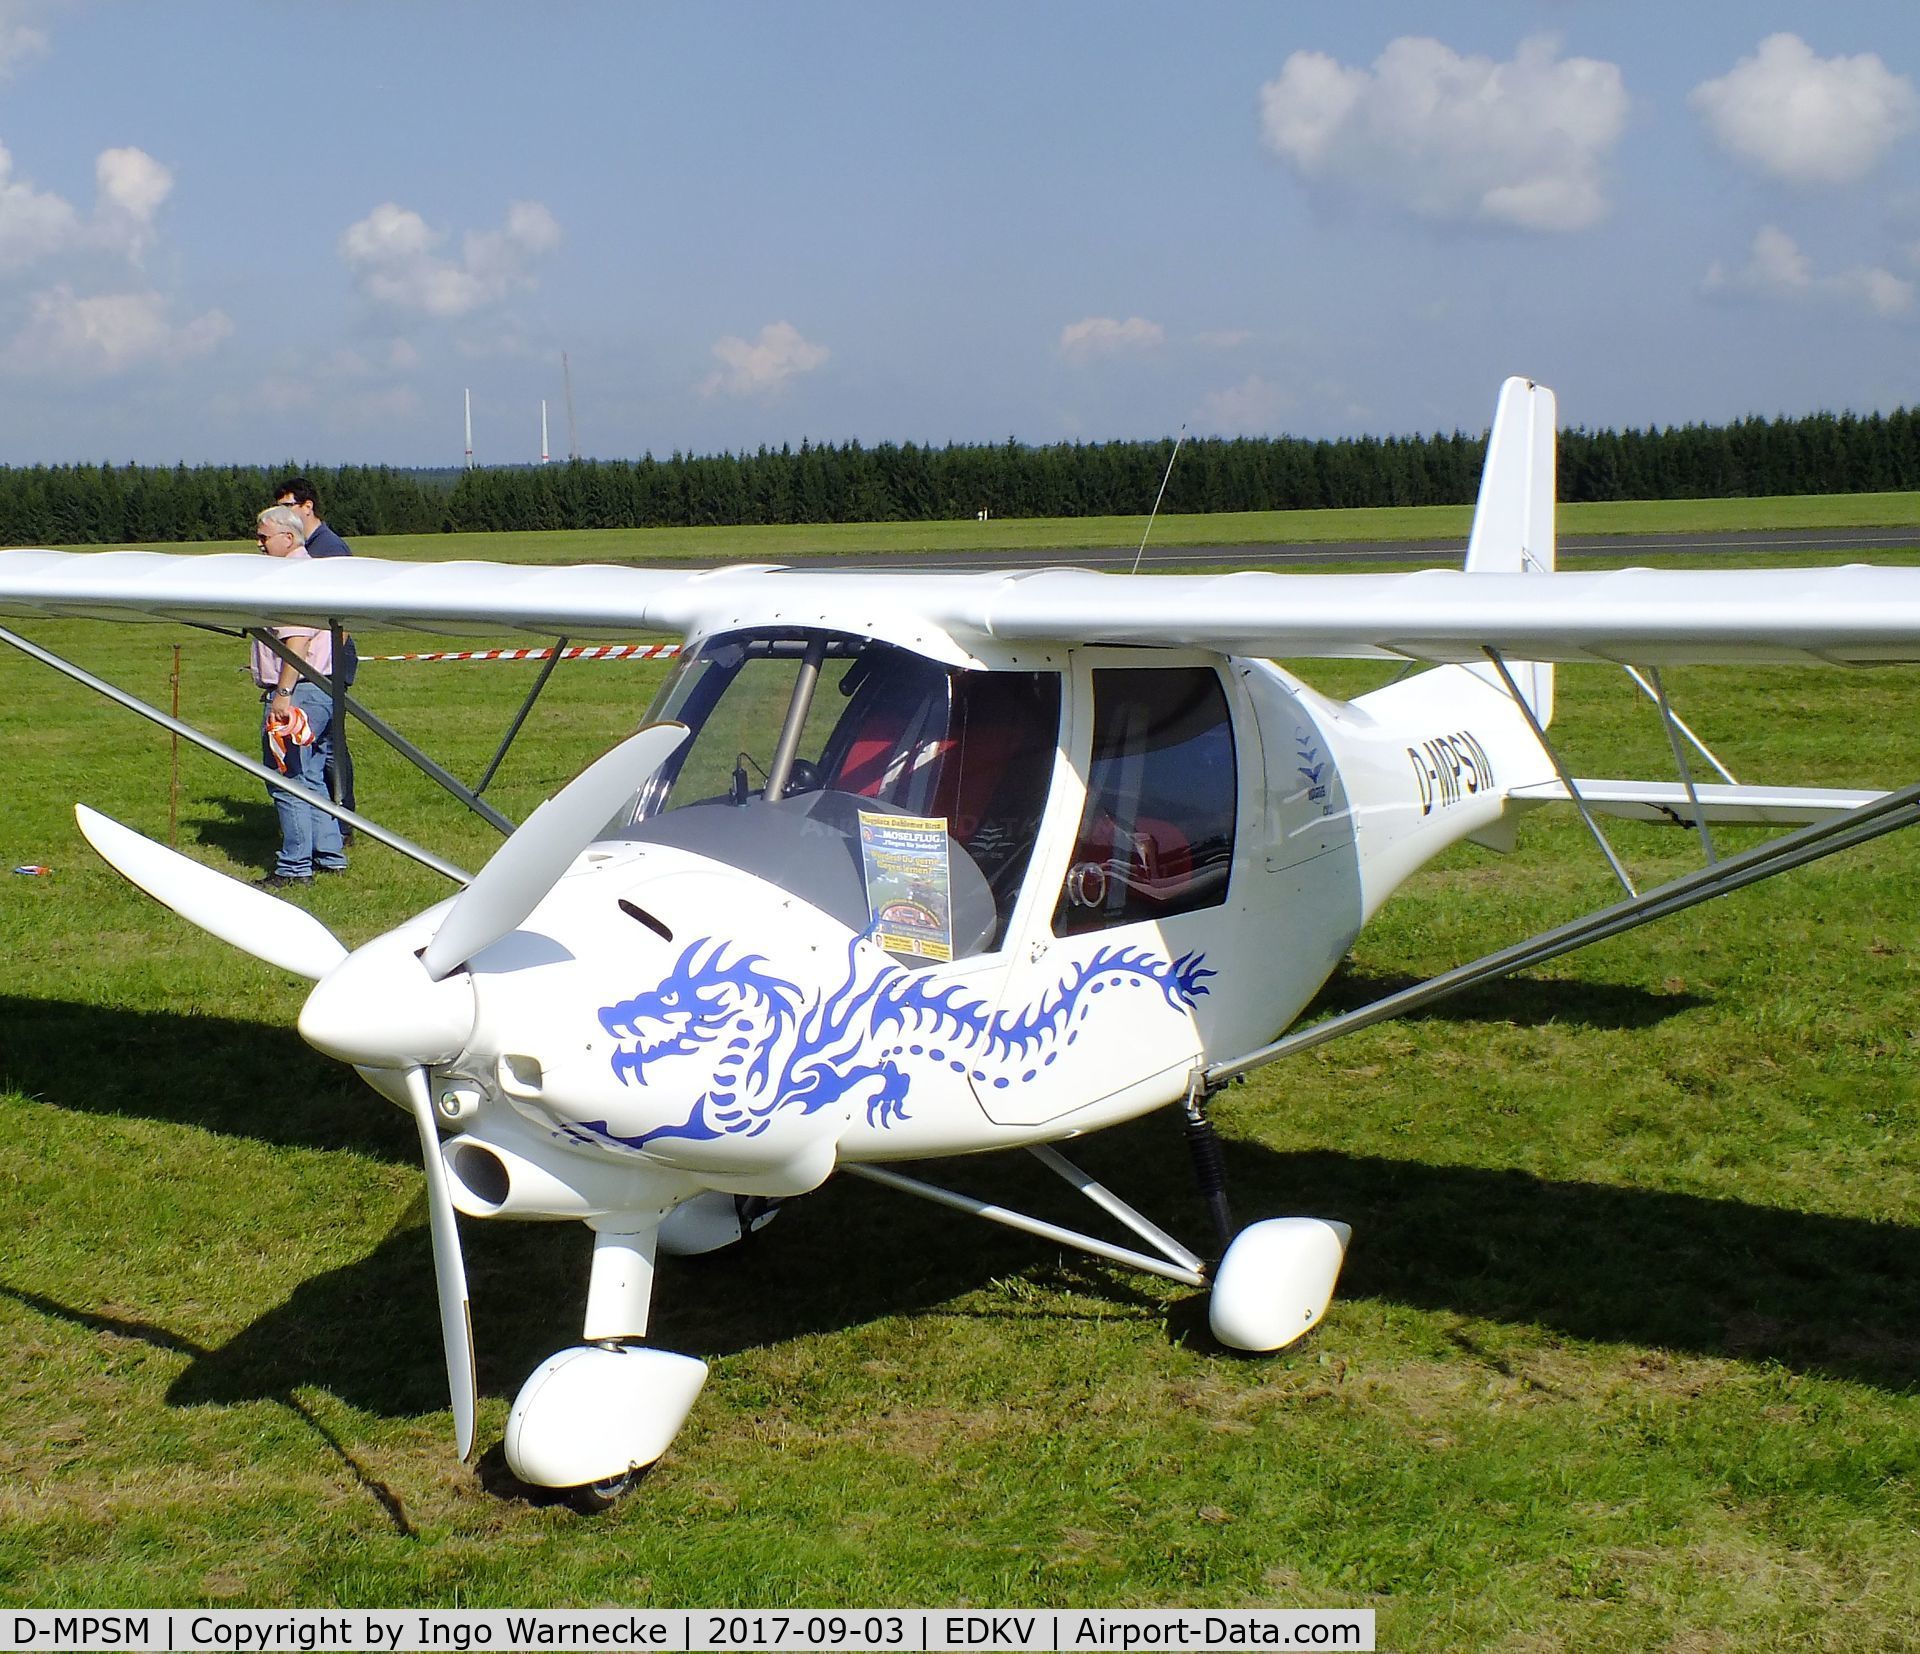 D-MPSM, Comco Ikarus C42 C/N Not found D-MPSM, Comco Ikarus C42 at the Dahlemer Binz 60th jubilee airfield display